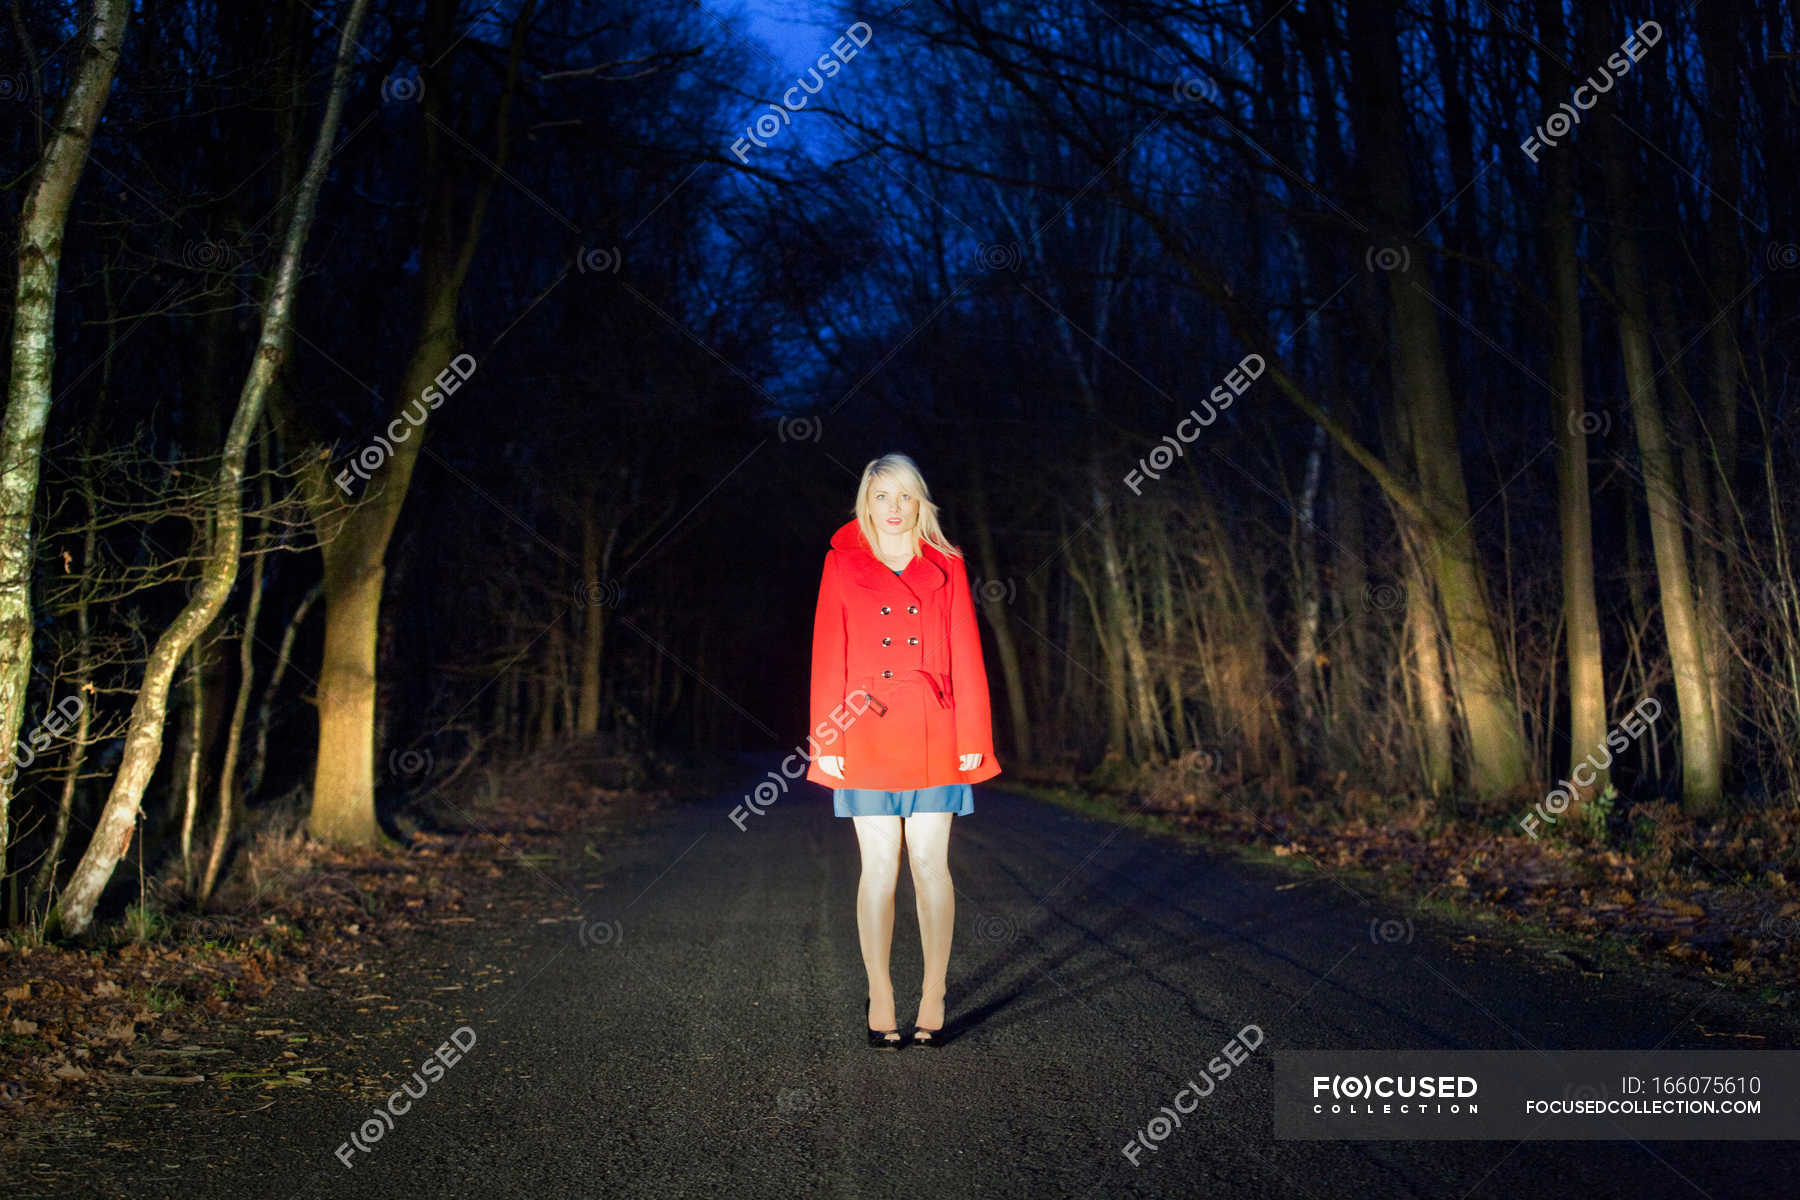 Woman Standing On Road In Woods At Night Outdoors Fear Stock Photo